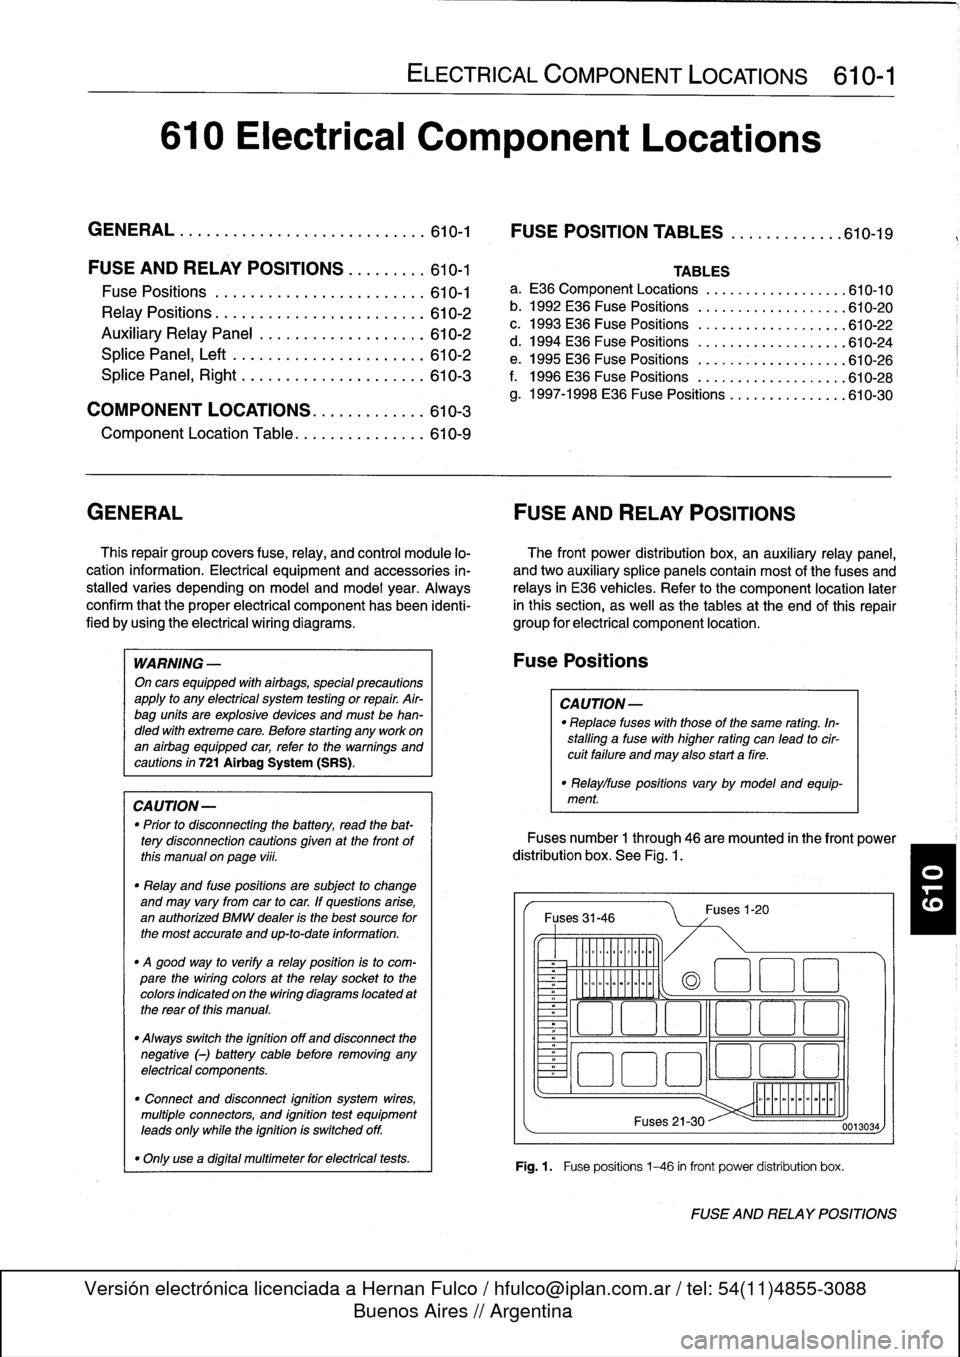 BMW 325i 1998 E36 Workshop Manual 
610
Electrical
Component
Locations

GENERAL
...........
.
.
.
.
.
.
.
.
.
........
610-1

	

FOSE
POSITION
TABLES
..
.
.
.
.
.
.....
.
610-19

FUSE
AND
RELAY
POSITIONS
.
...
.
.
.
.
.
610-1

Fuse
Pos